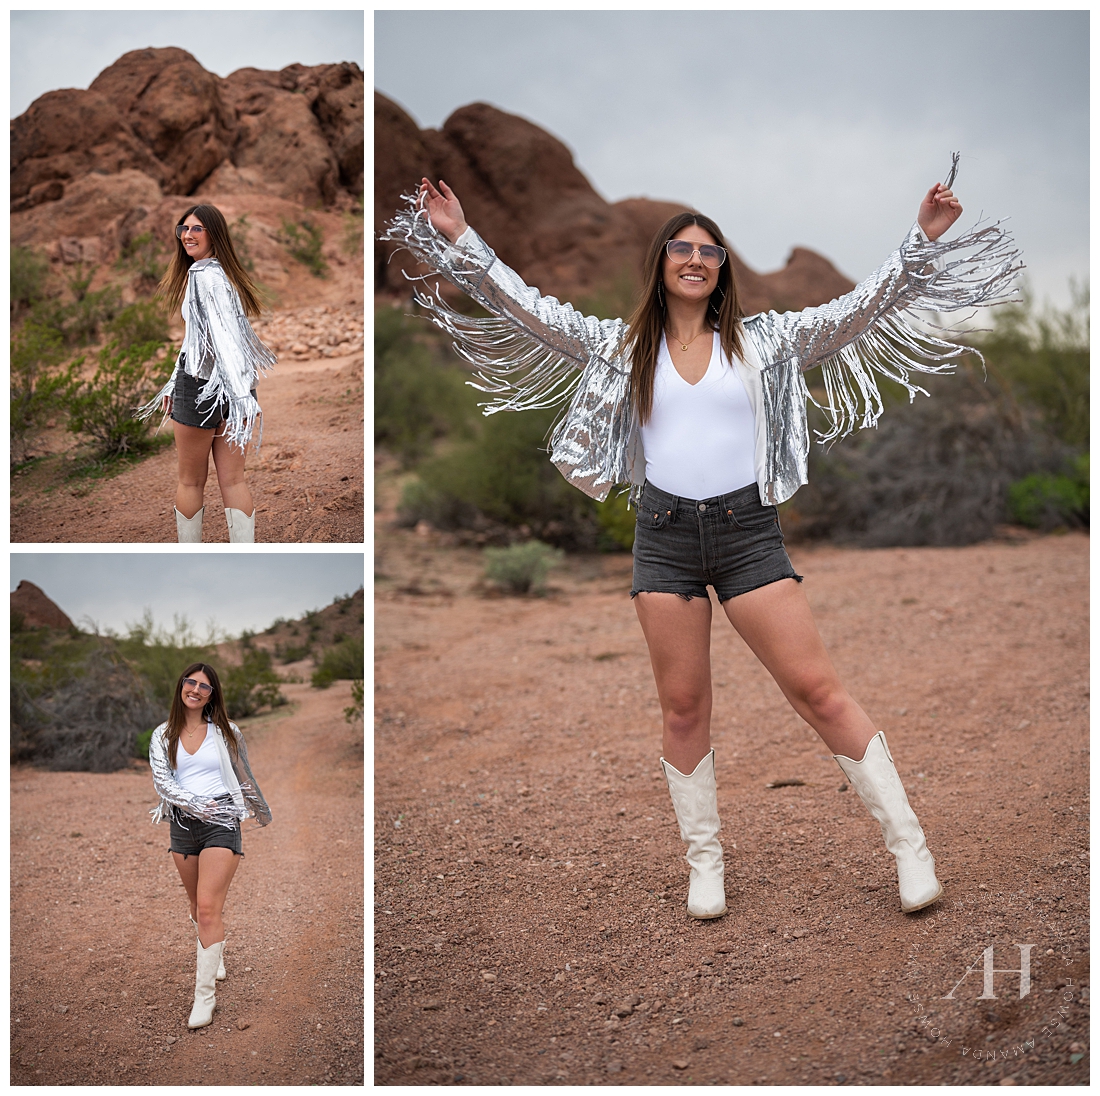 Portraits From Senior Photo Education | Desert Rocker Vibes | Photographed by the Best Tacoma, Washington Senior Photographer Amanda Howse Photography